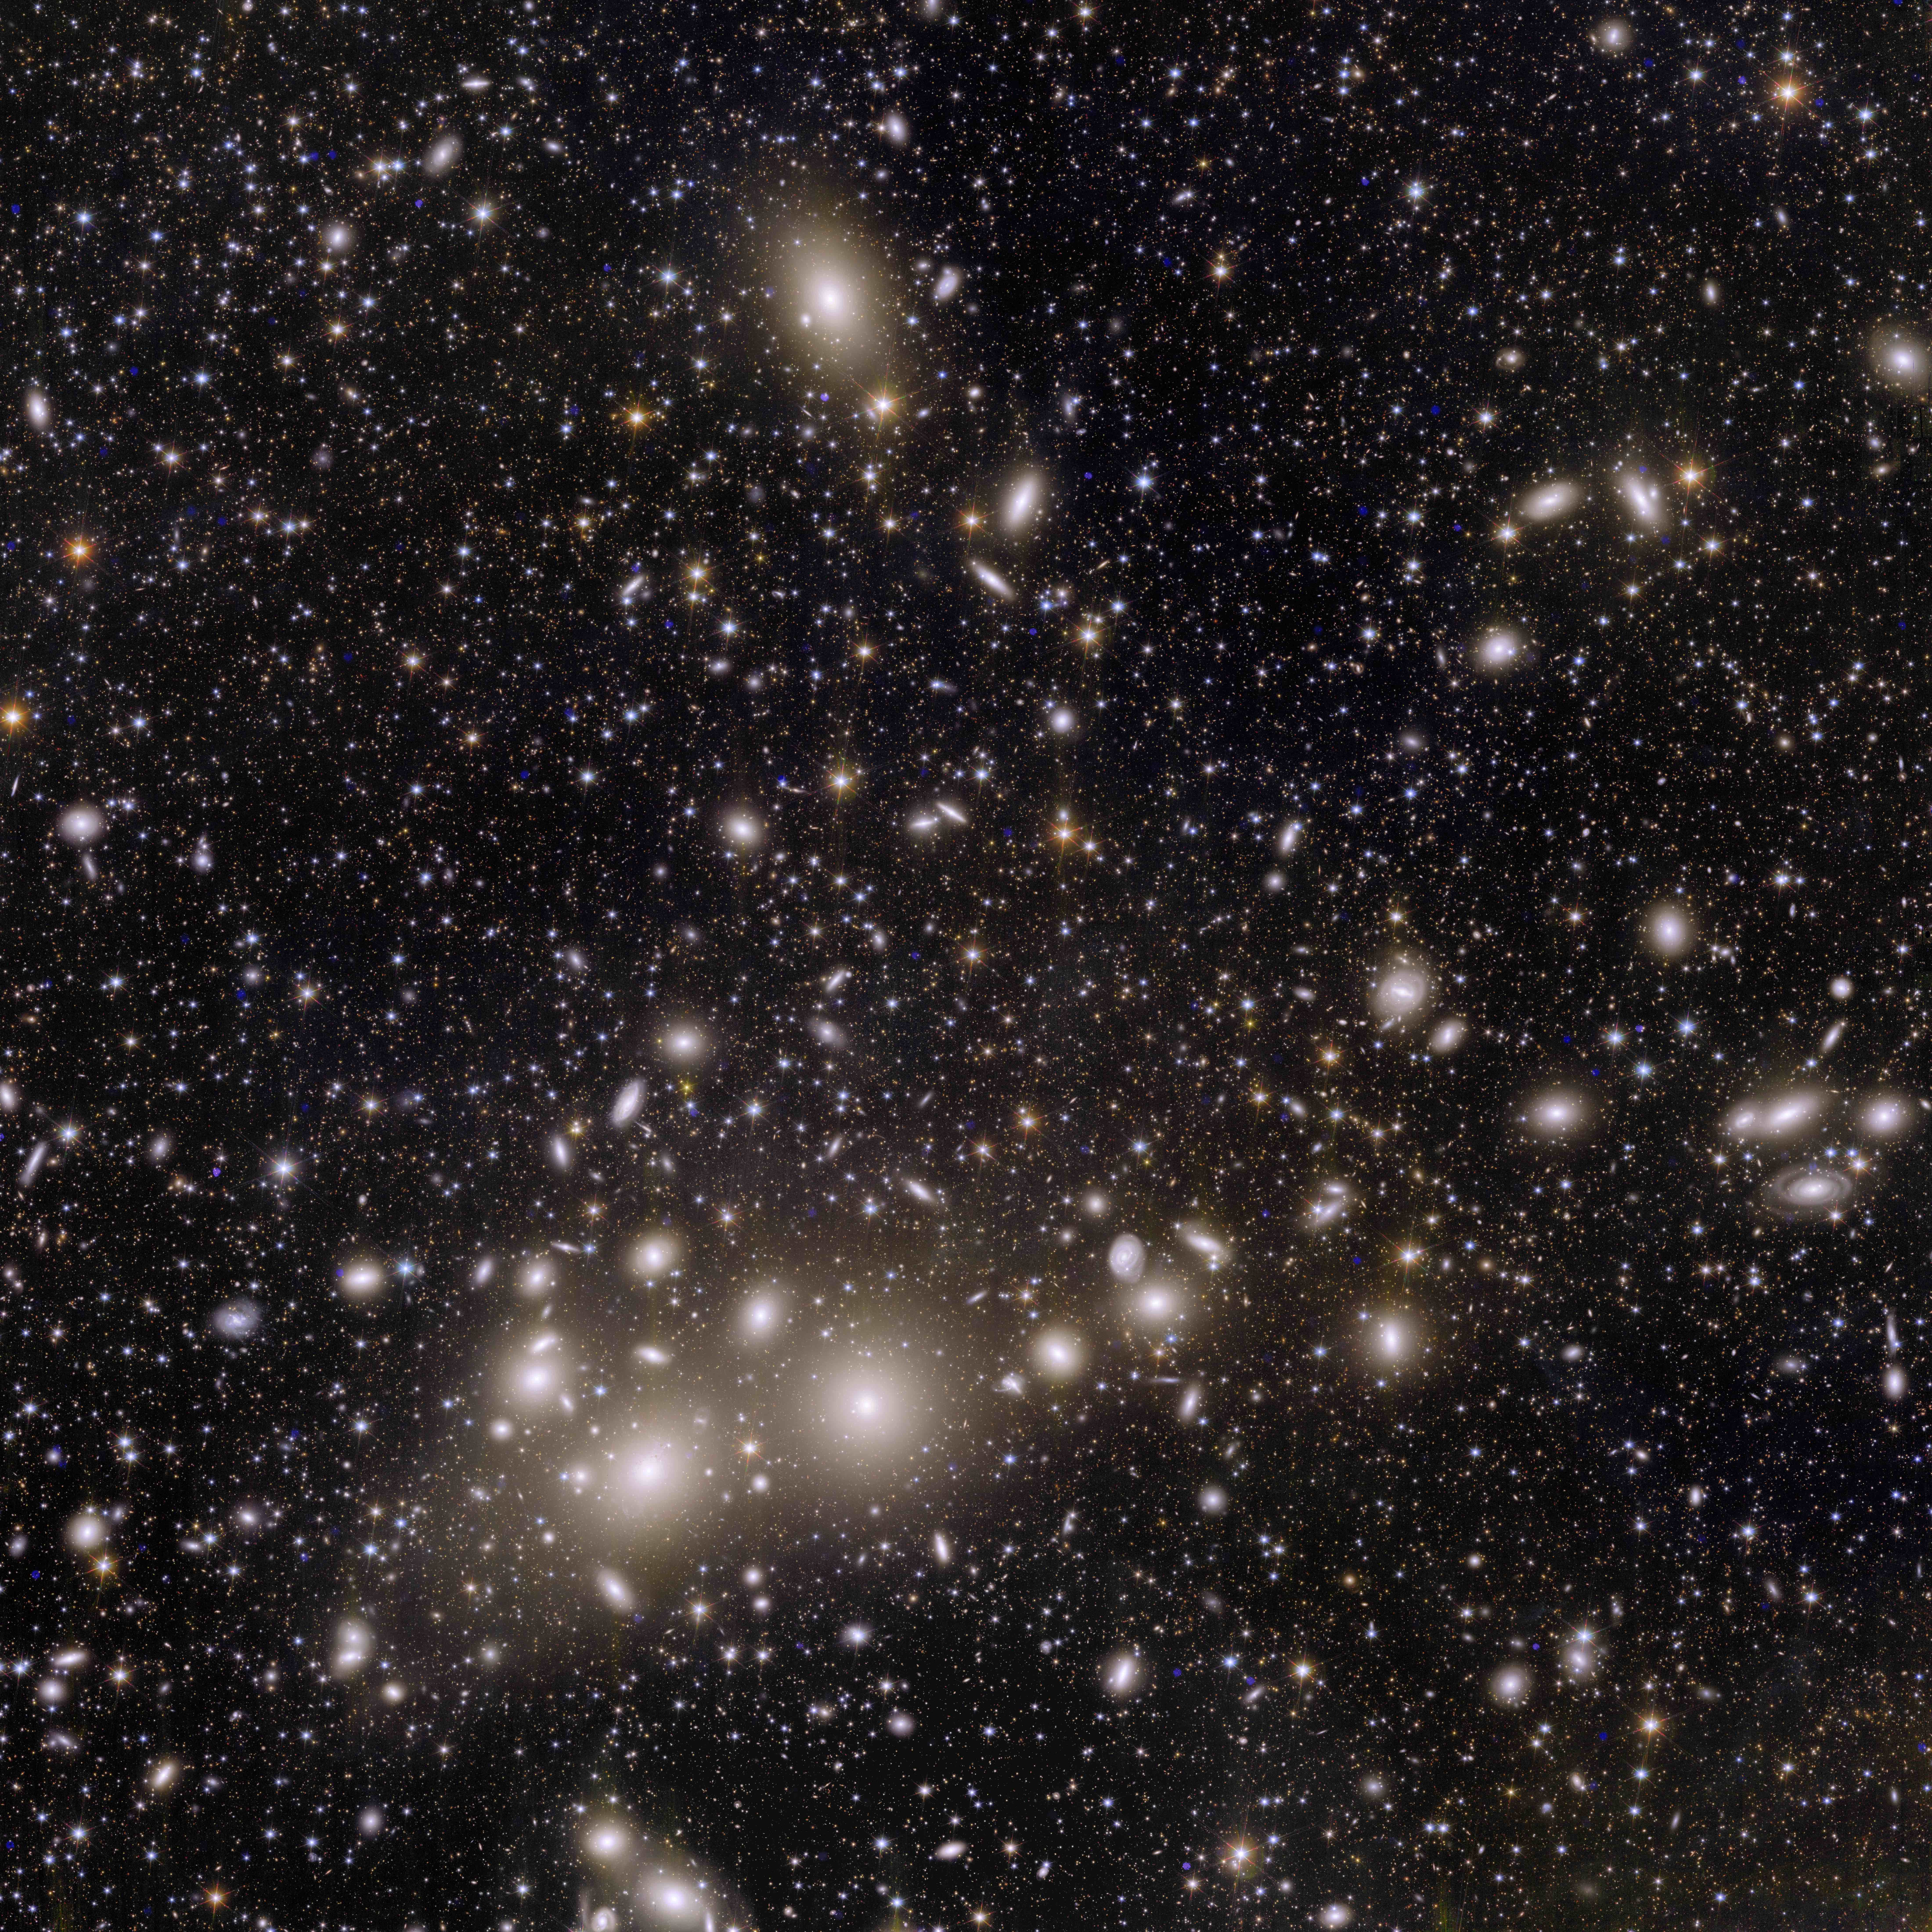 Perseus cluster of galaxies as seen by the Euclid spacecraft